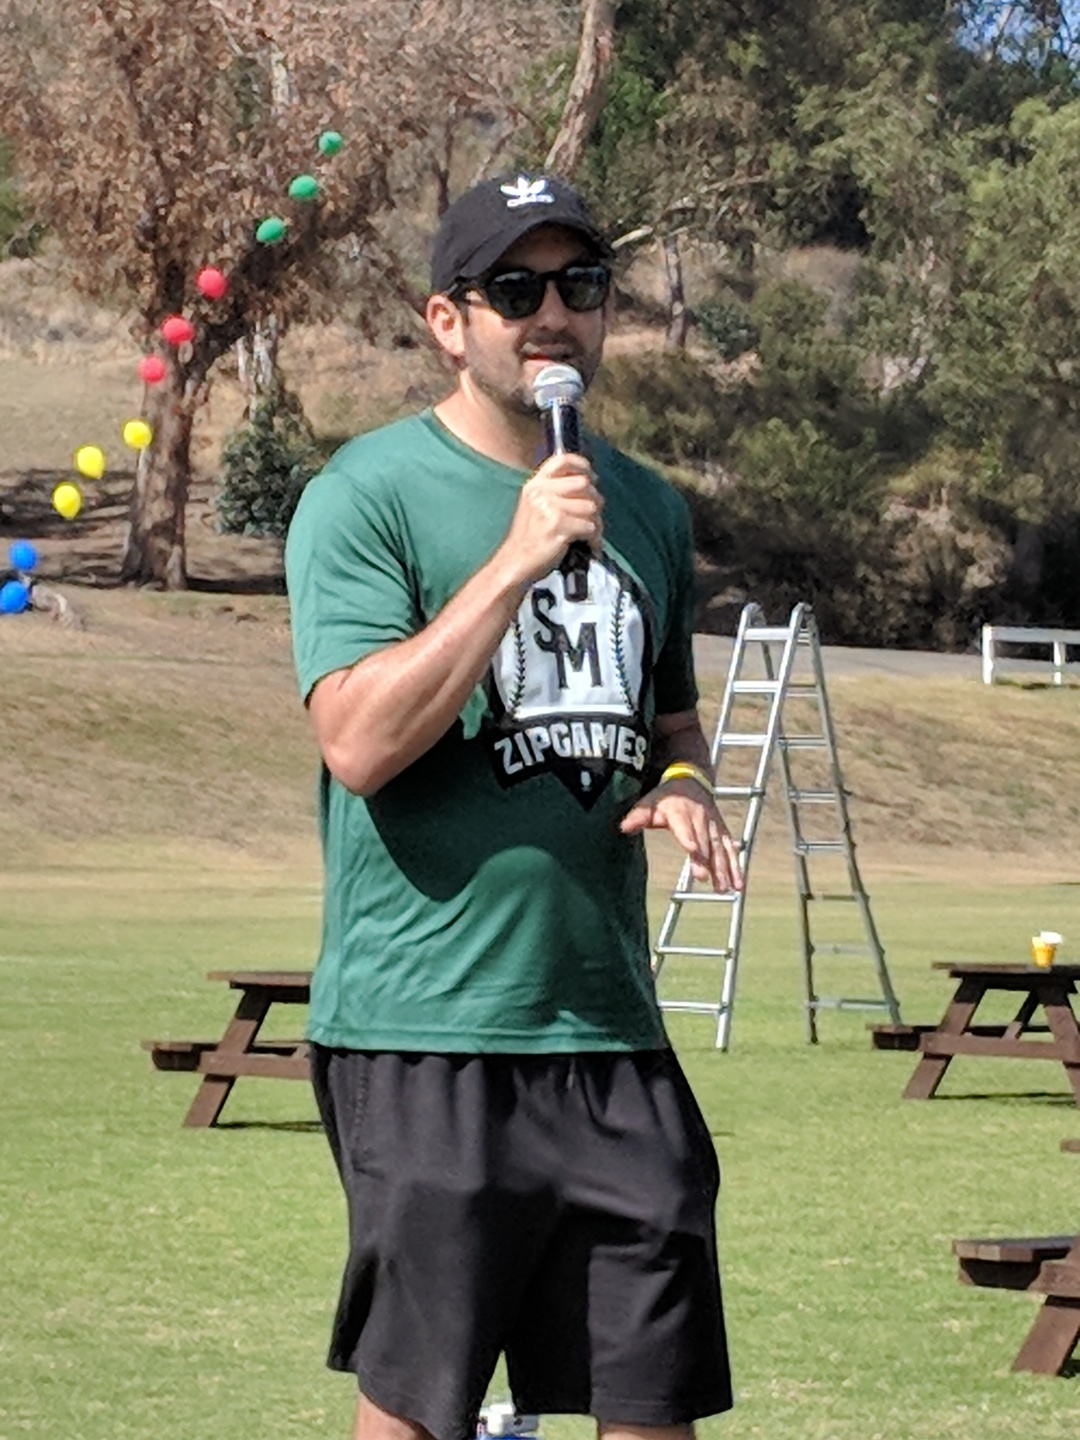 Man in a green shirt and ballcap speaking into a microphone in front of a green field outdoors.